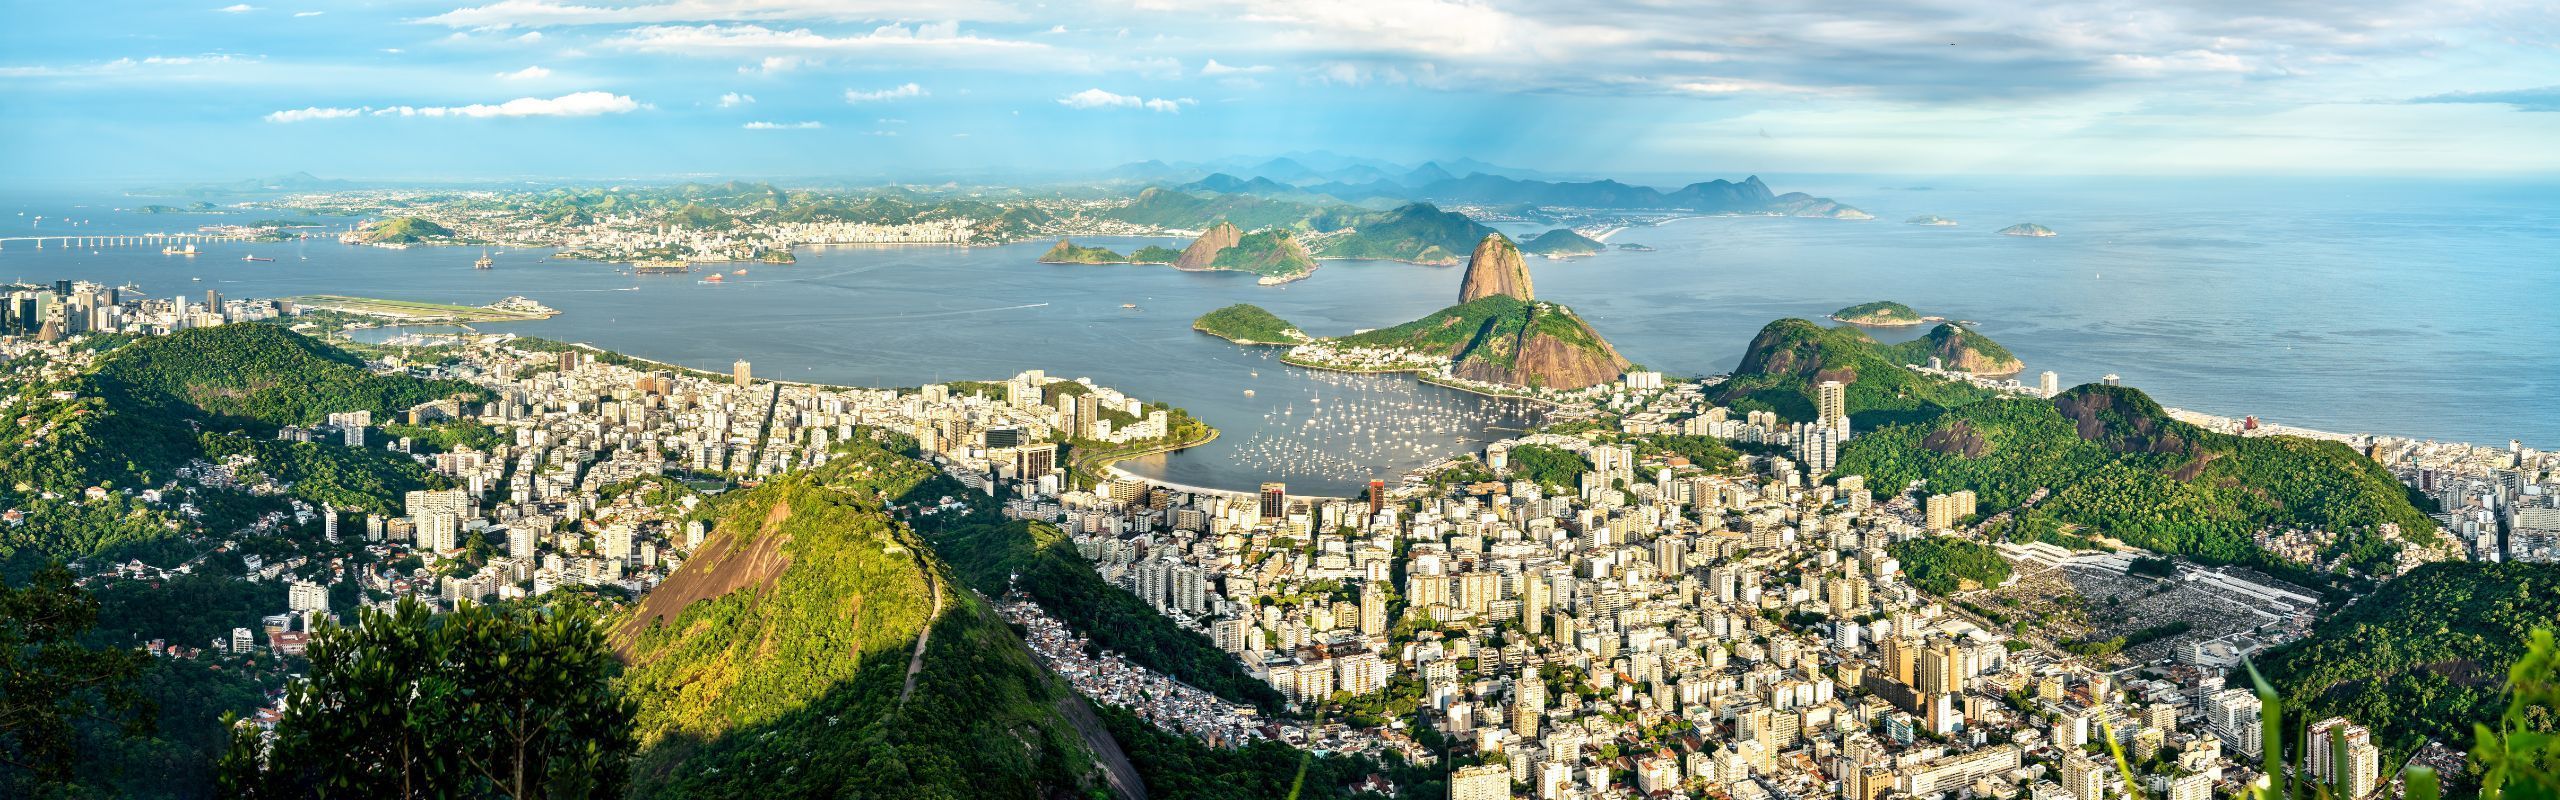 Image of an aerial view of Brazil